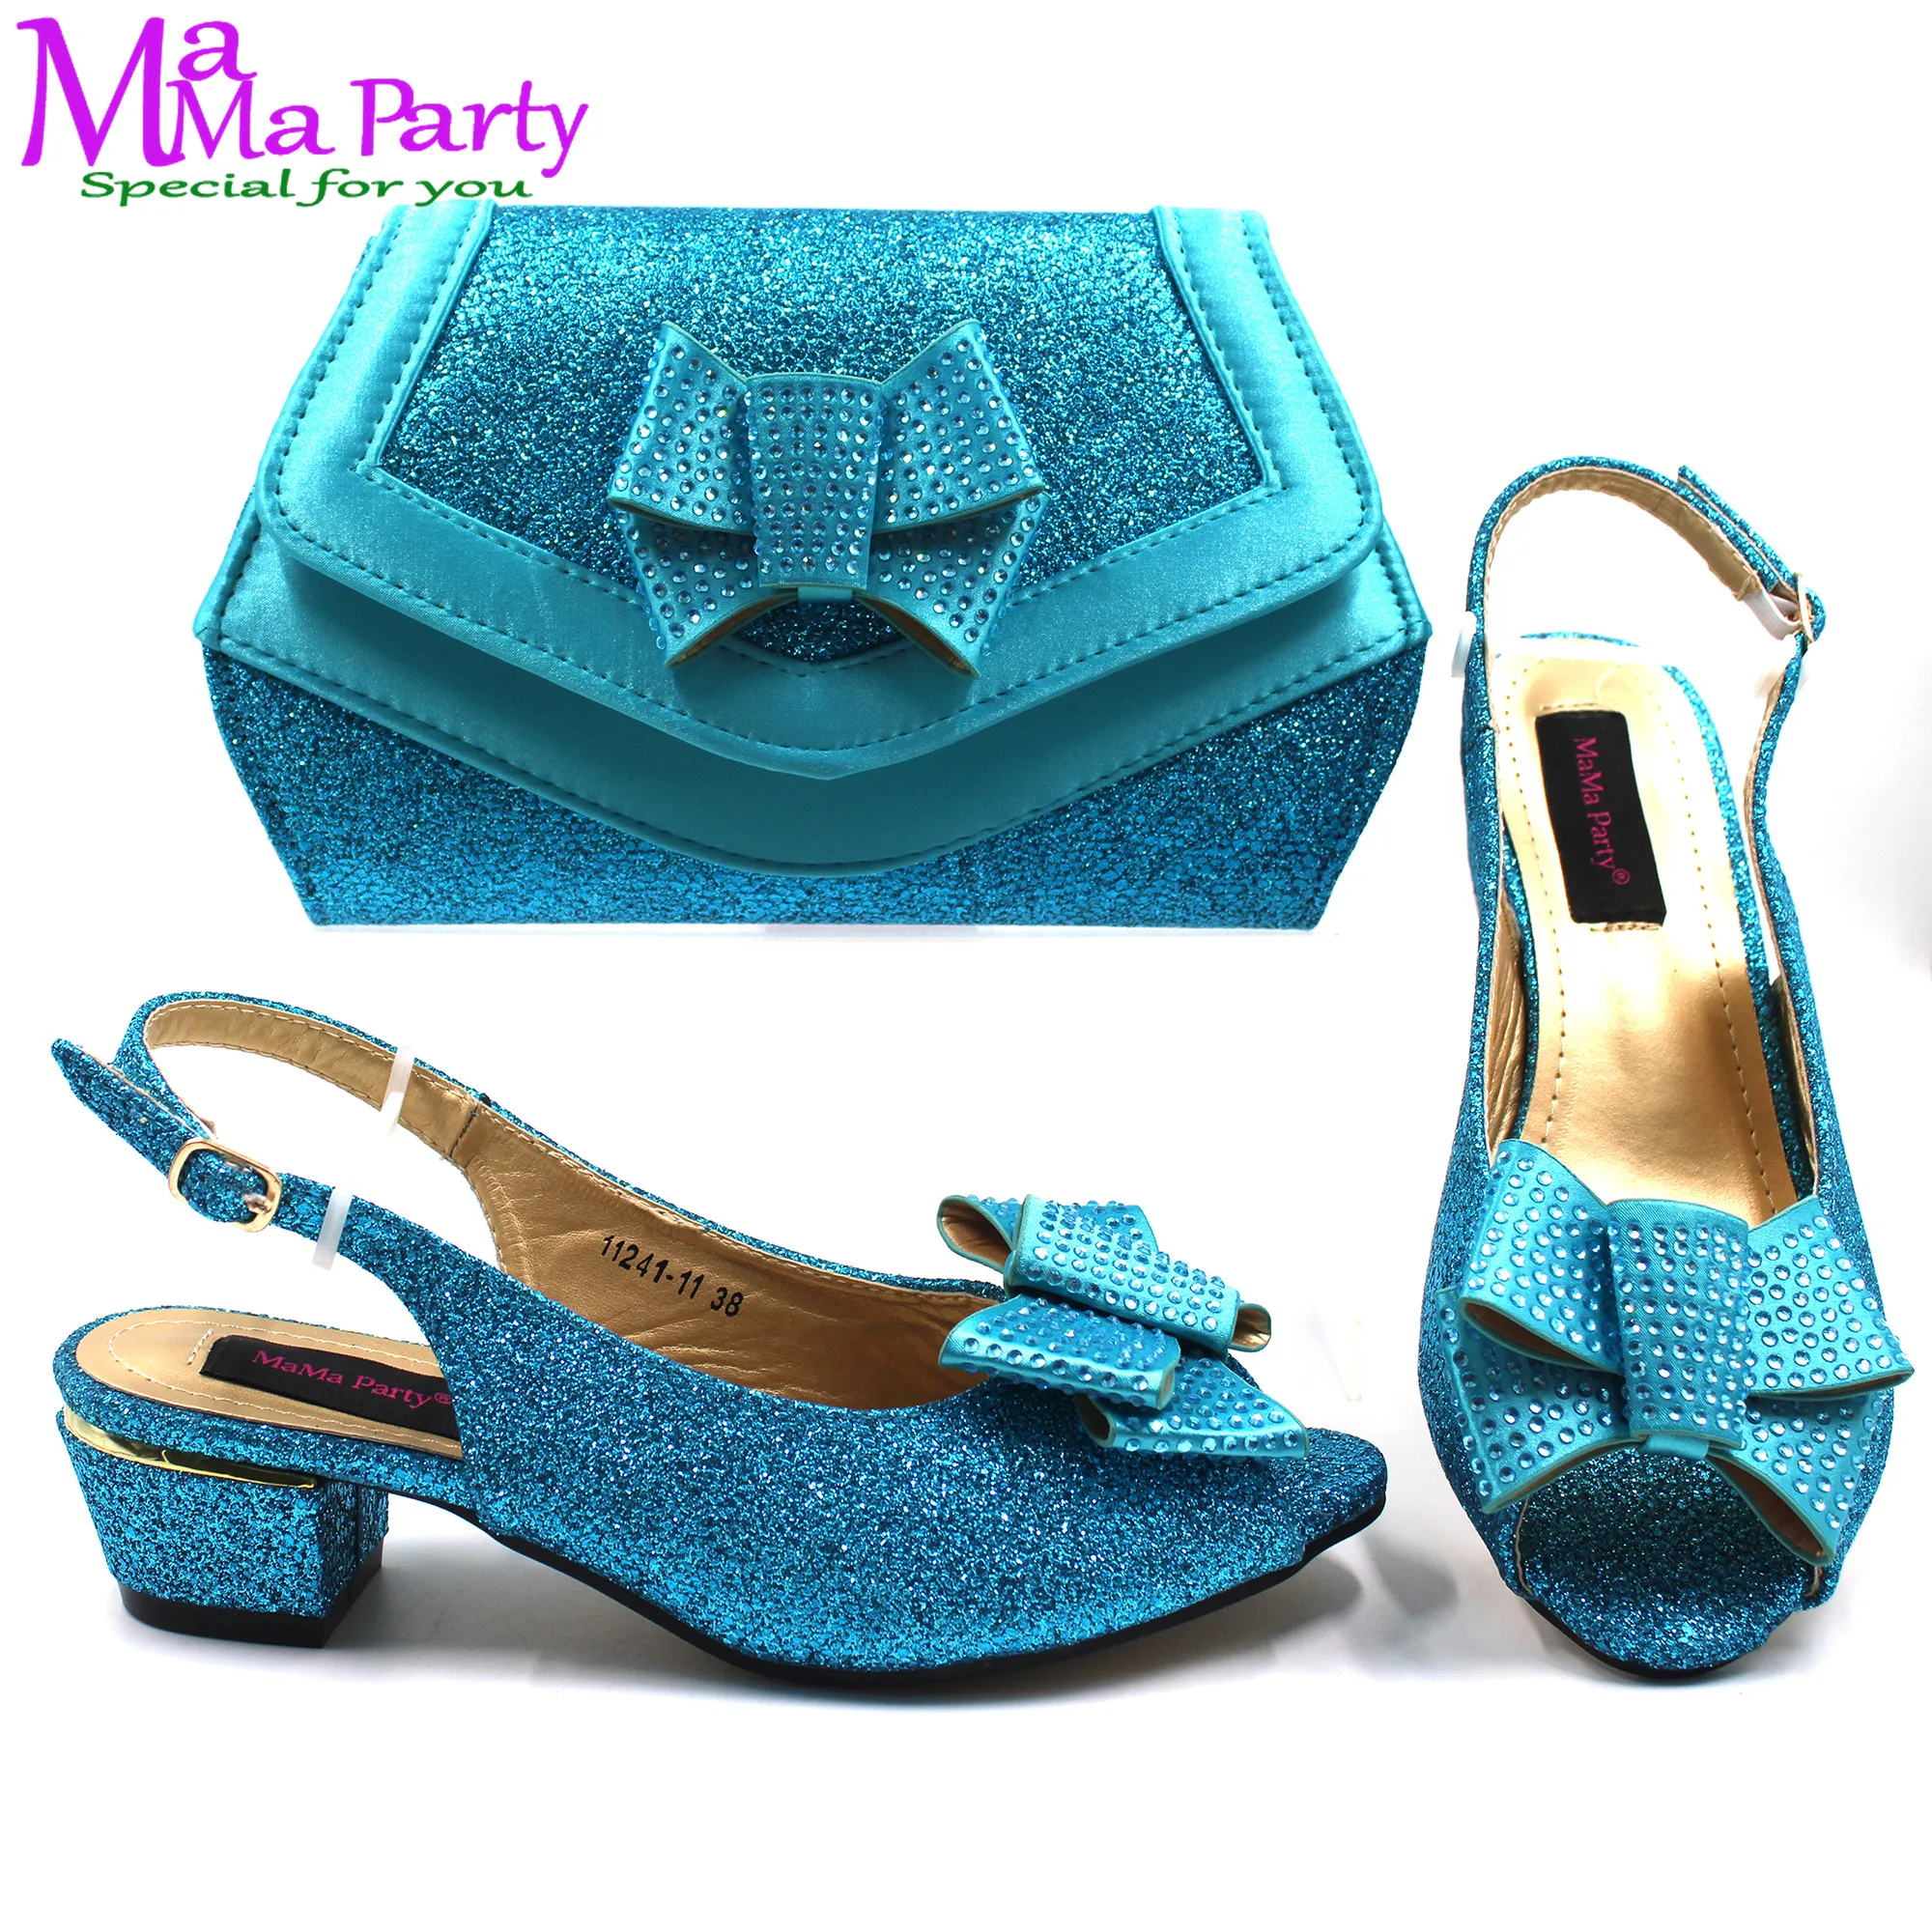 

Sky Blue New Arrivals Nigerian Women Shoes and Bag Set Italian Design Low Heels with Crystal Peep Toe Sandals for Party